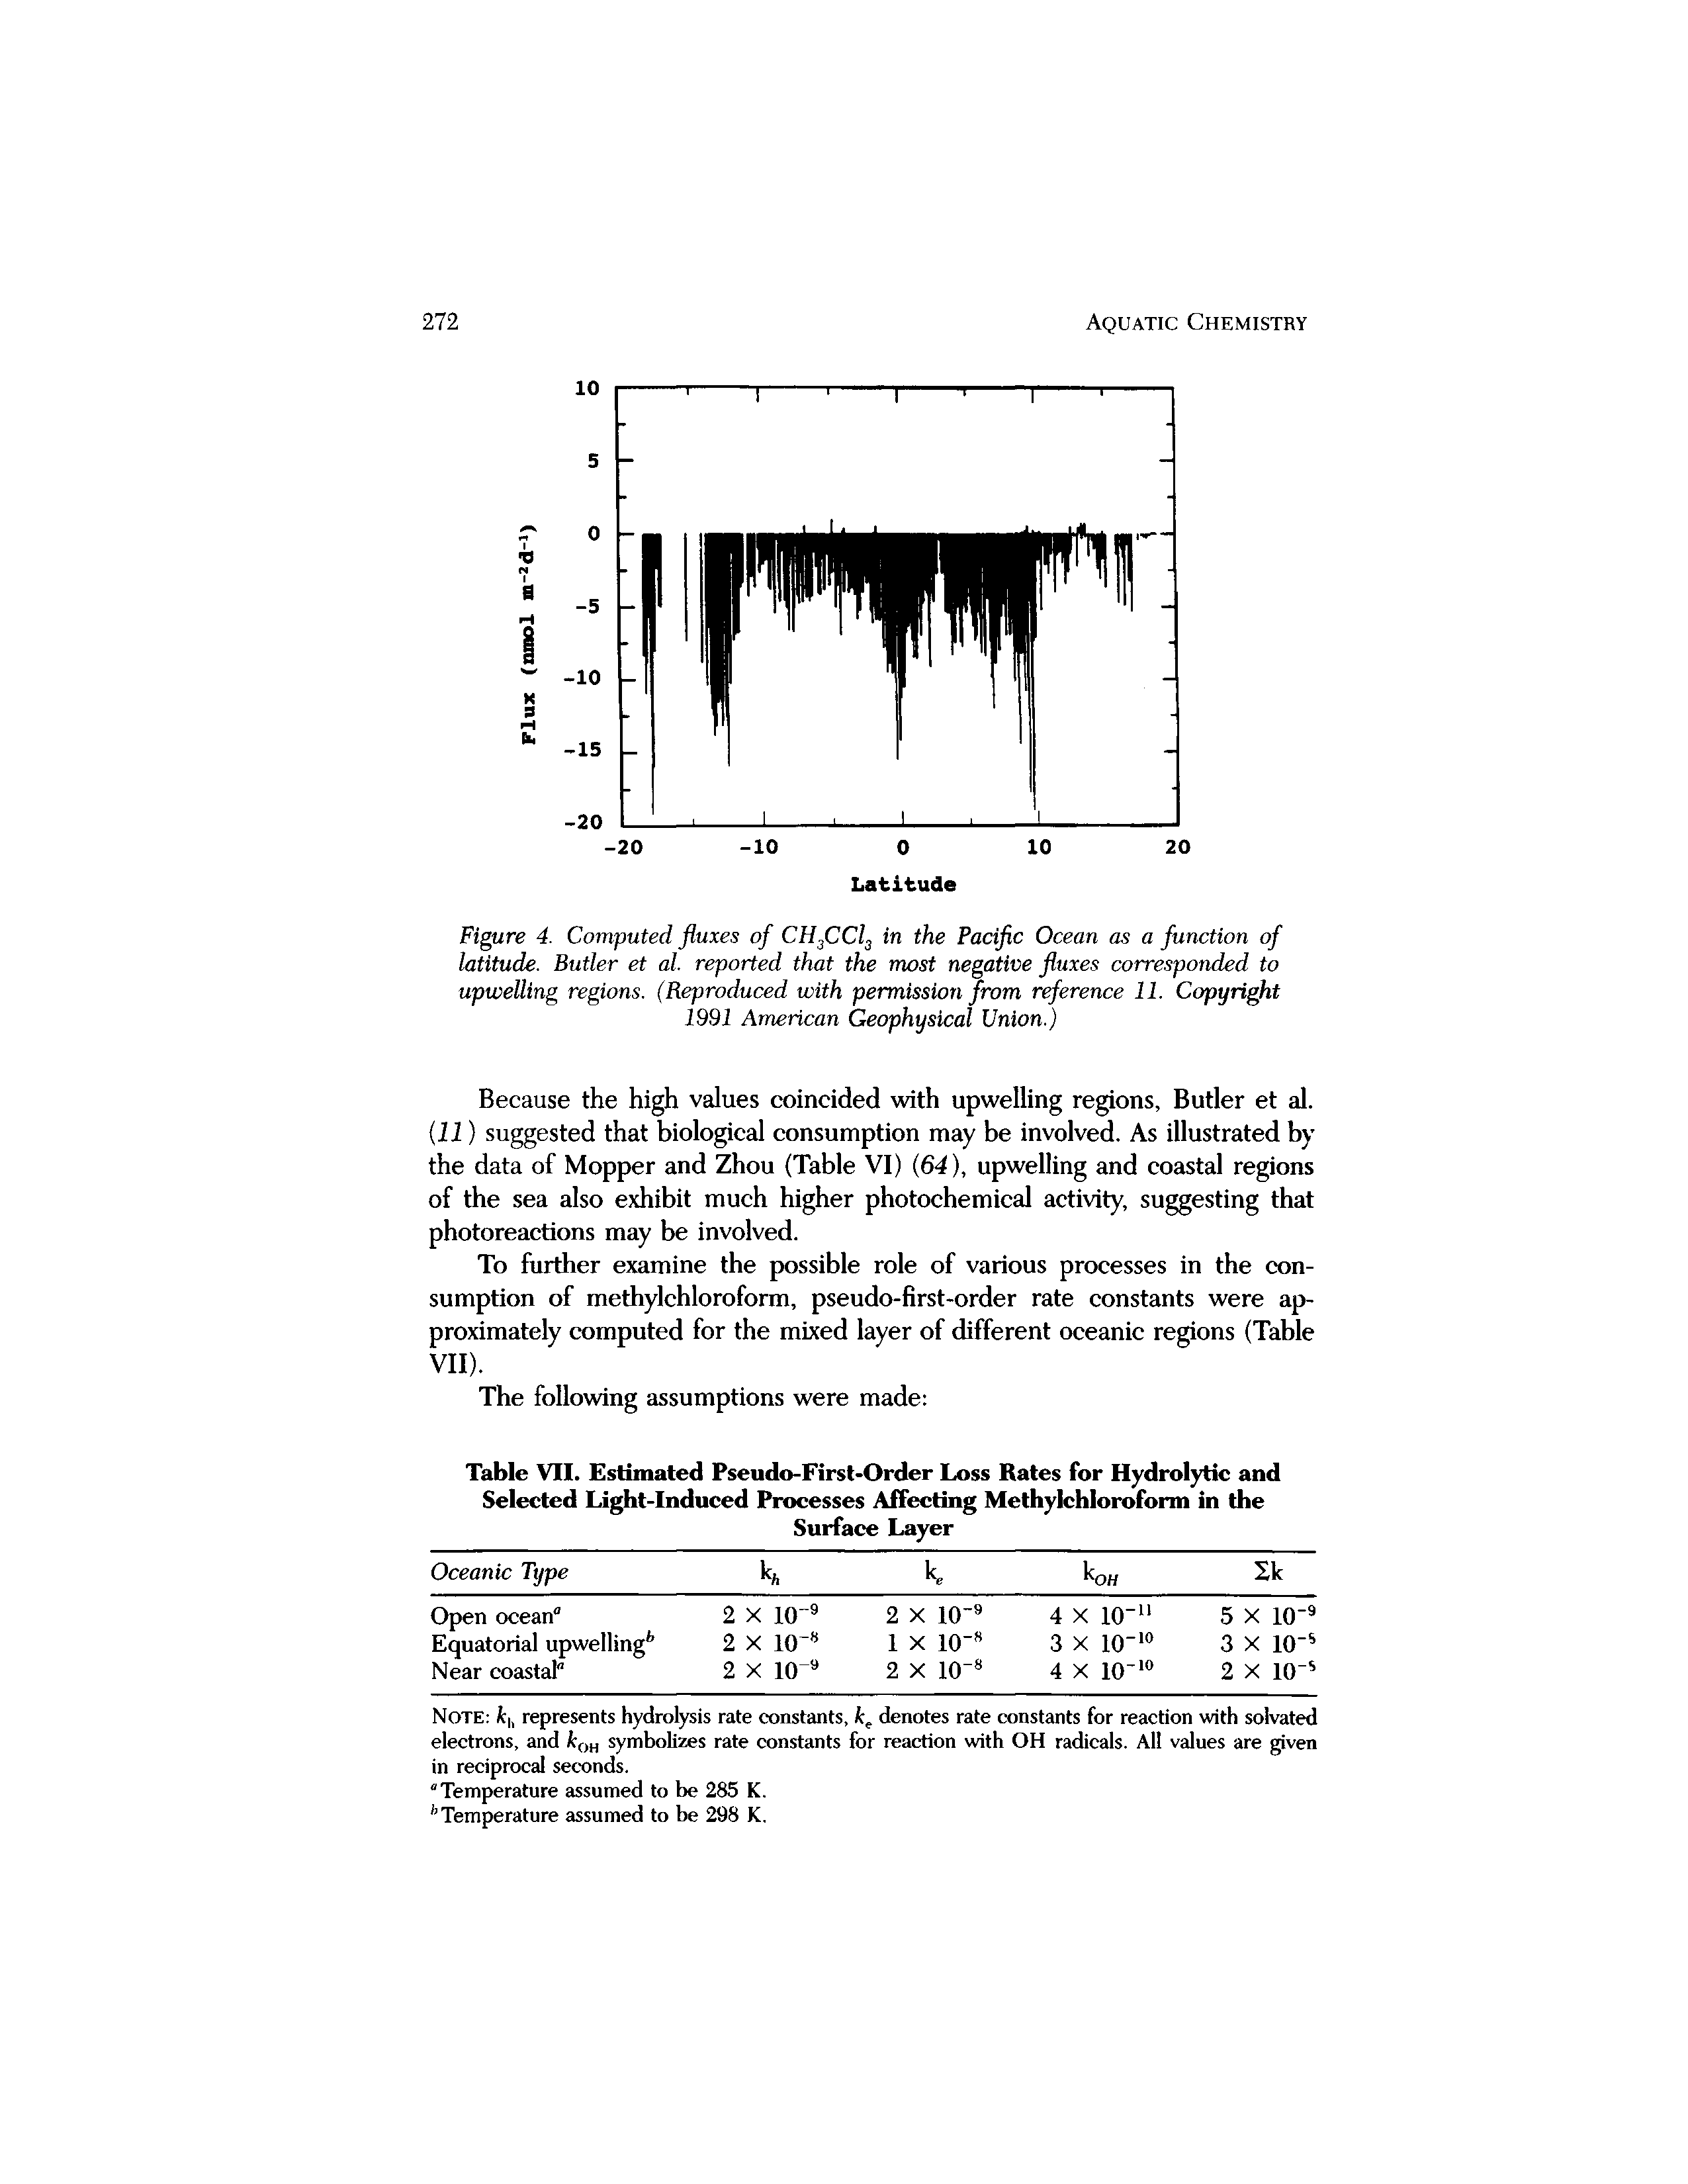 Figure 4. Computed fluxes of CH3CCl3 in the Pacific Ocean as a function of latitude. Butler et al. reported that the most negative fluxes corresponded to upwelling regions. (Reproduced with permission from reference 11. Copyright 1991 American Geophysical Union.)...